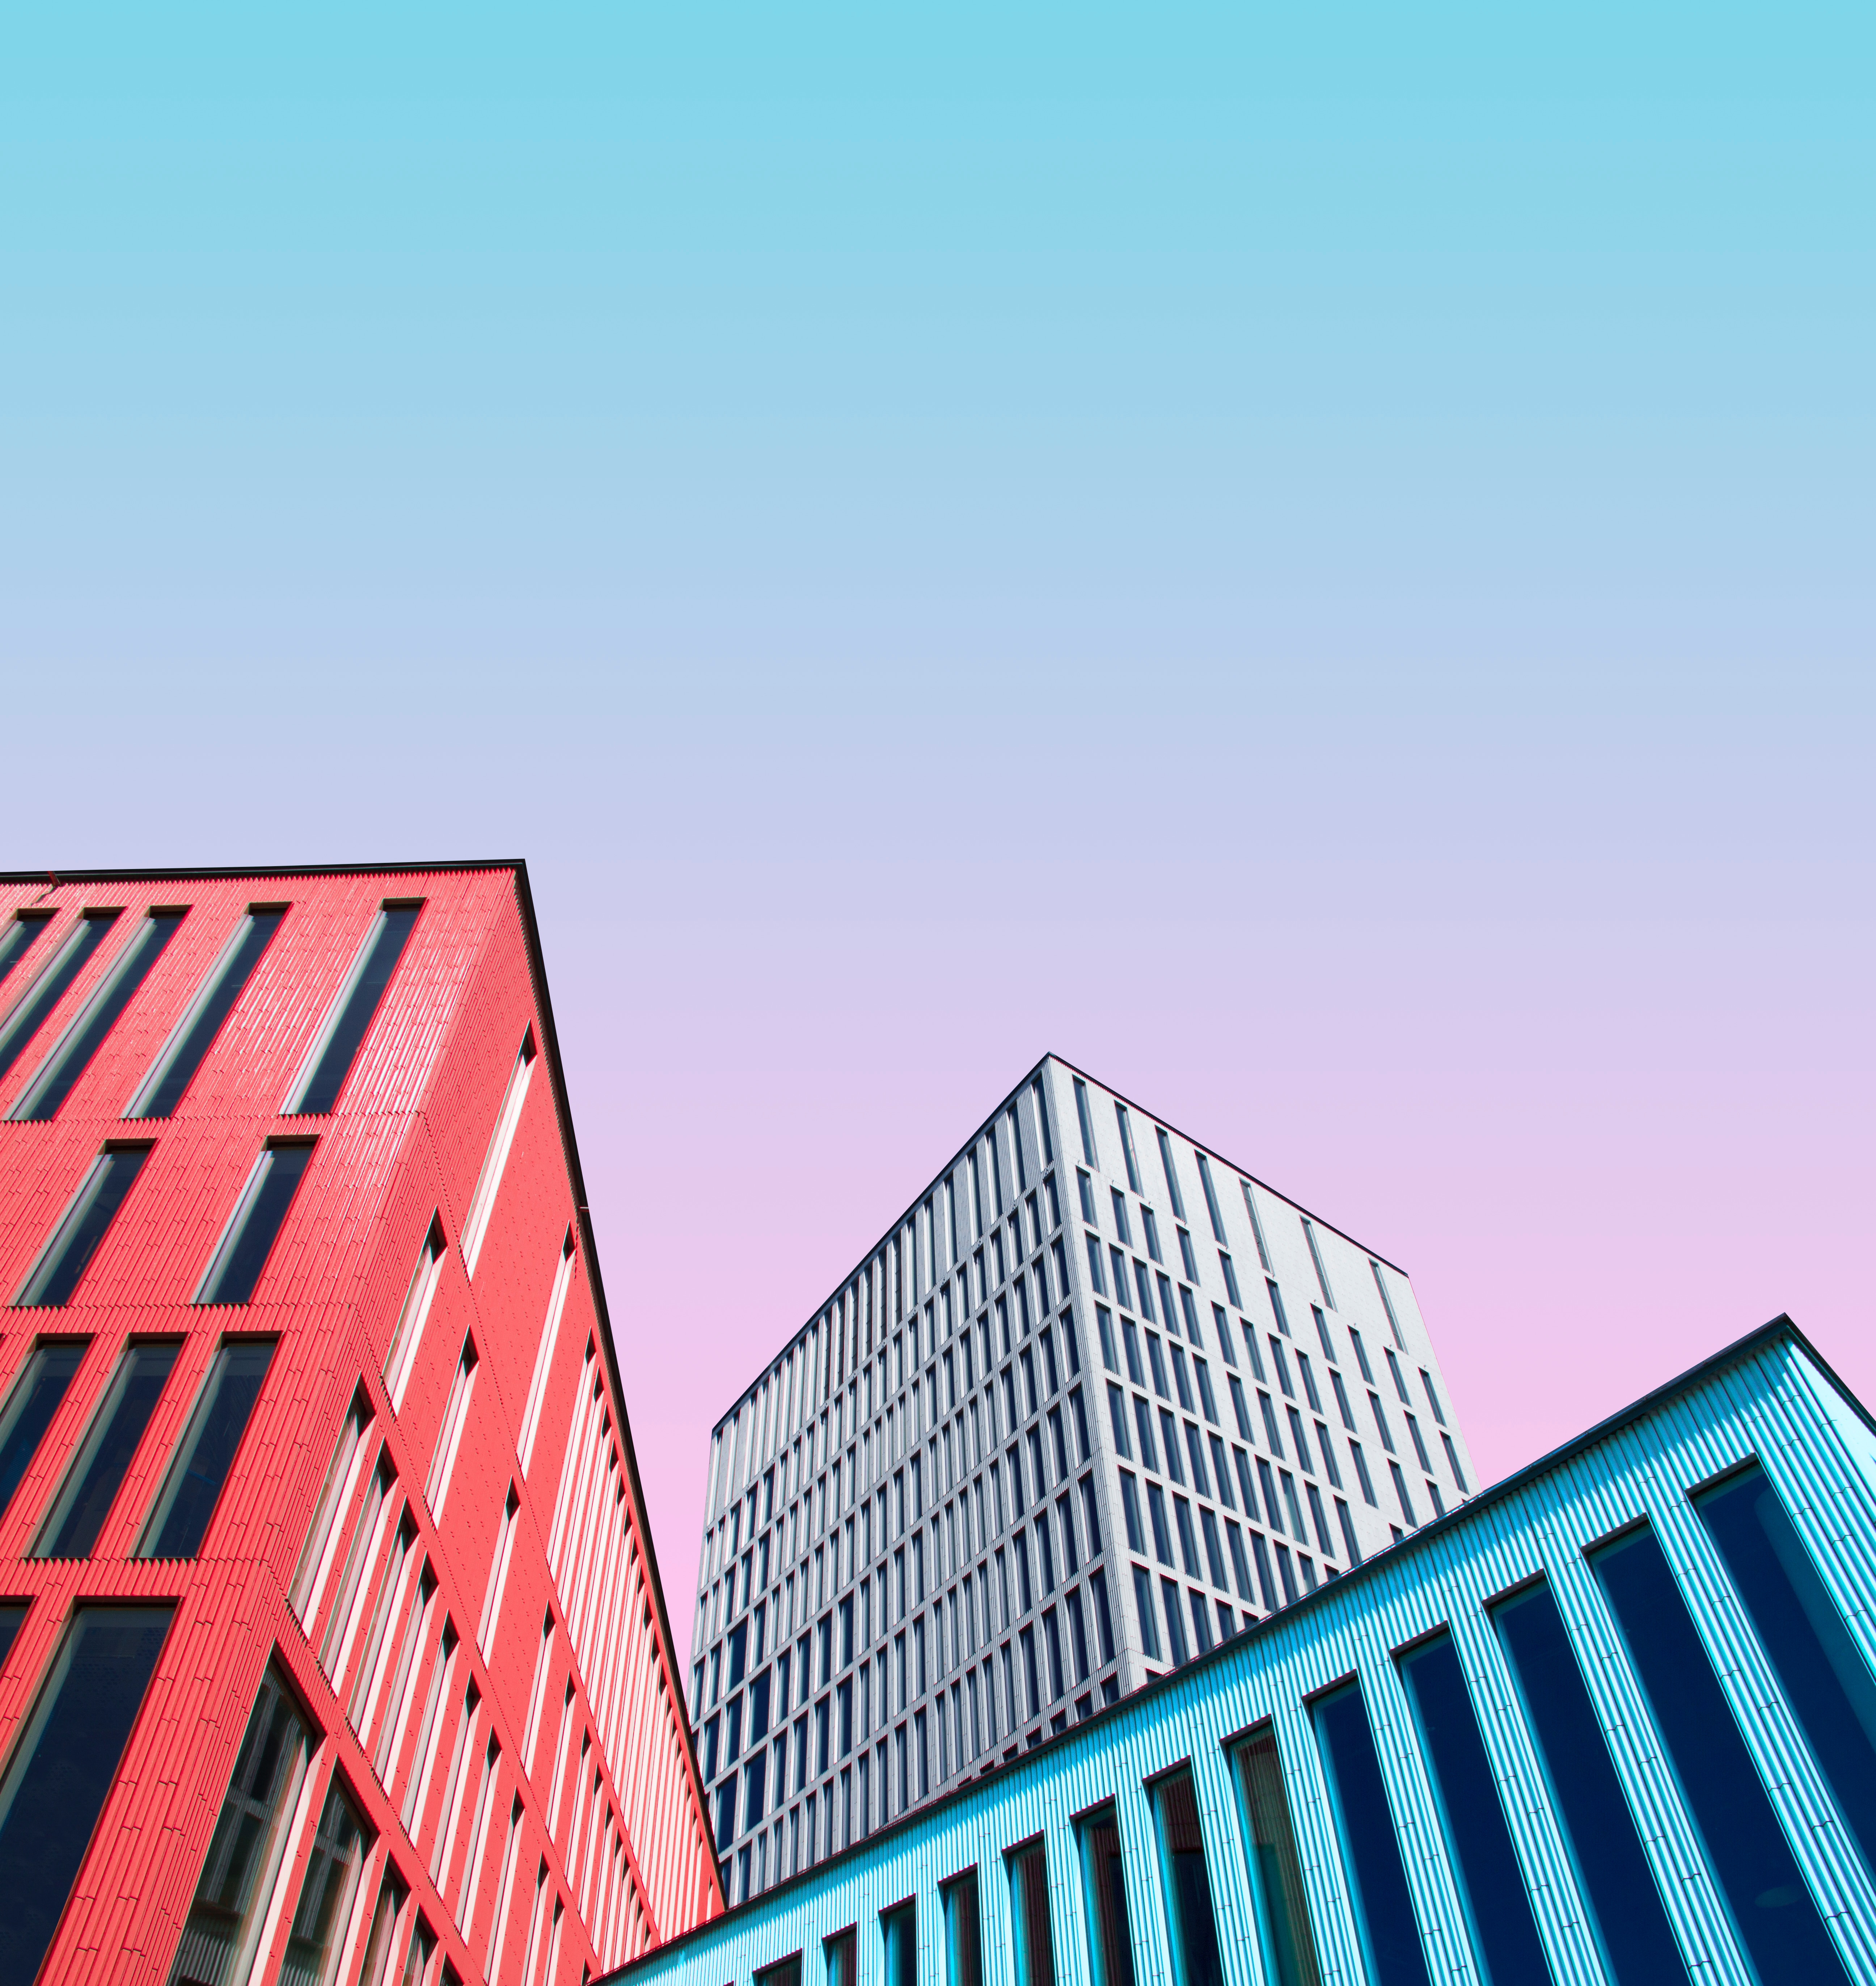 multicolored, architecture, building, motley, minimalism, symmetry Full HD